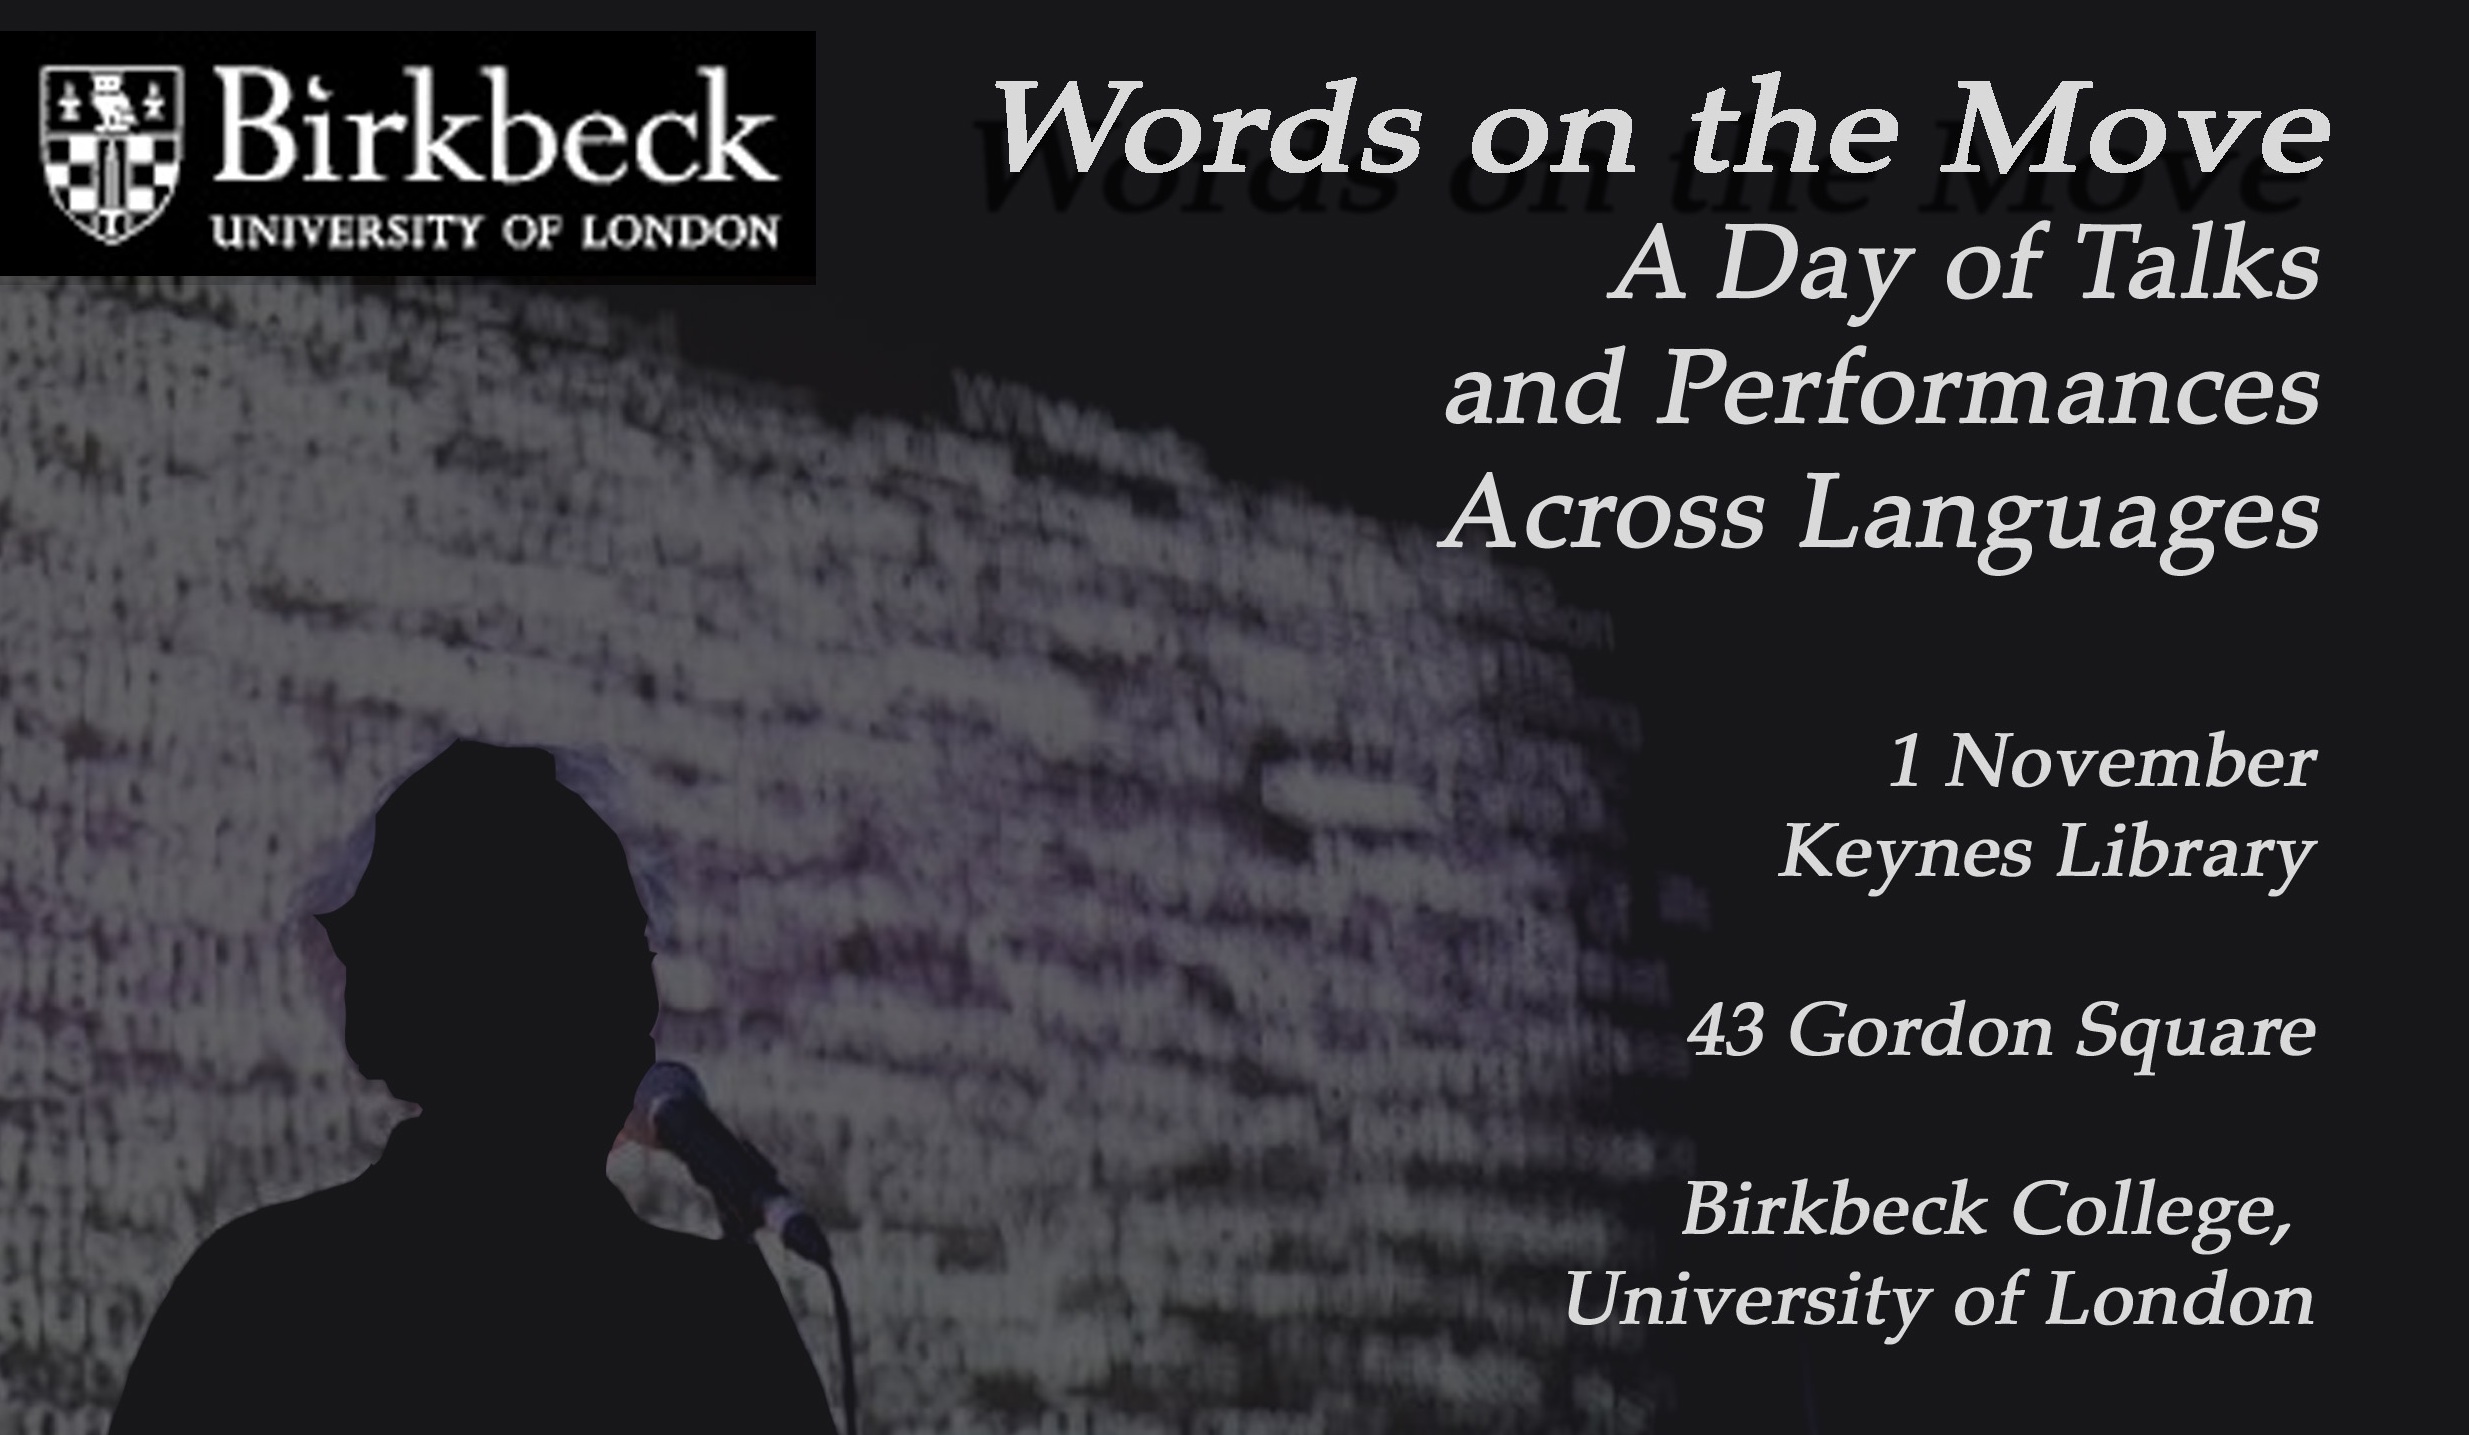 Words on the Move: A Day of Talks and Performances across Languages